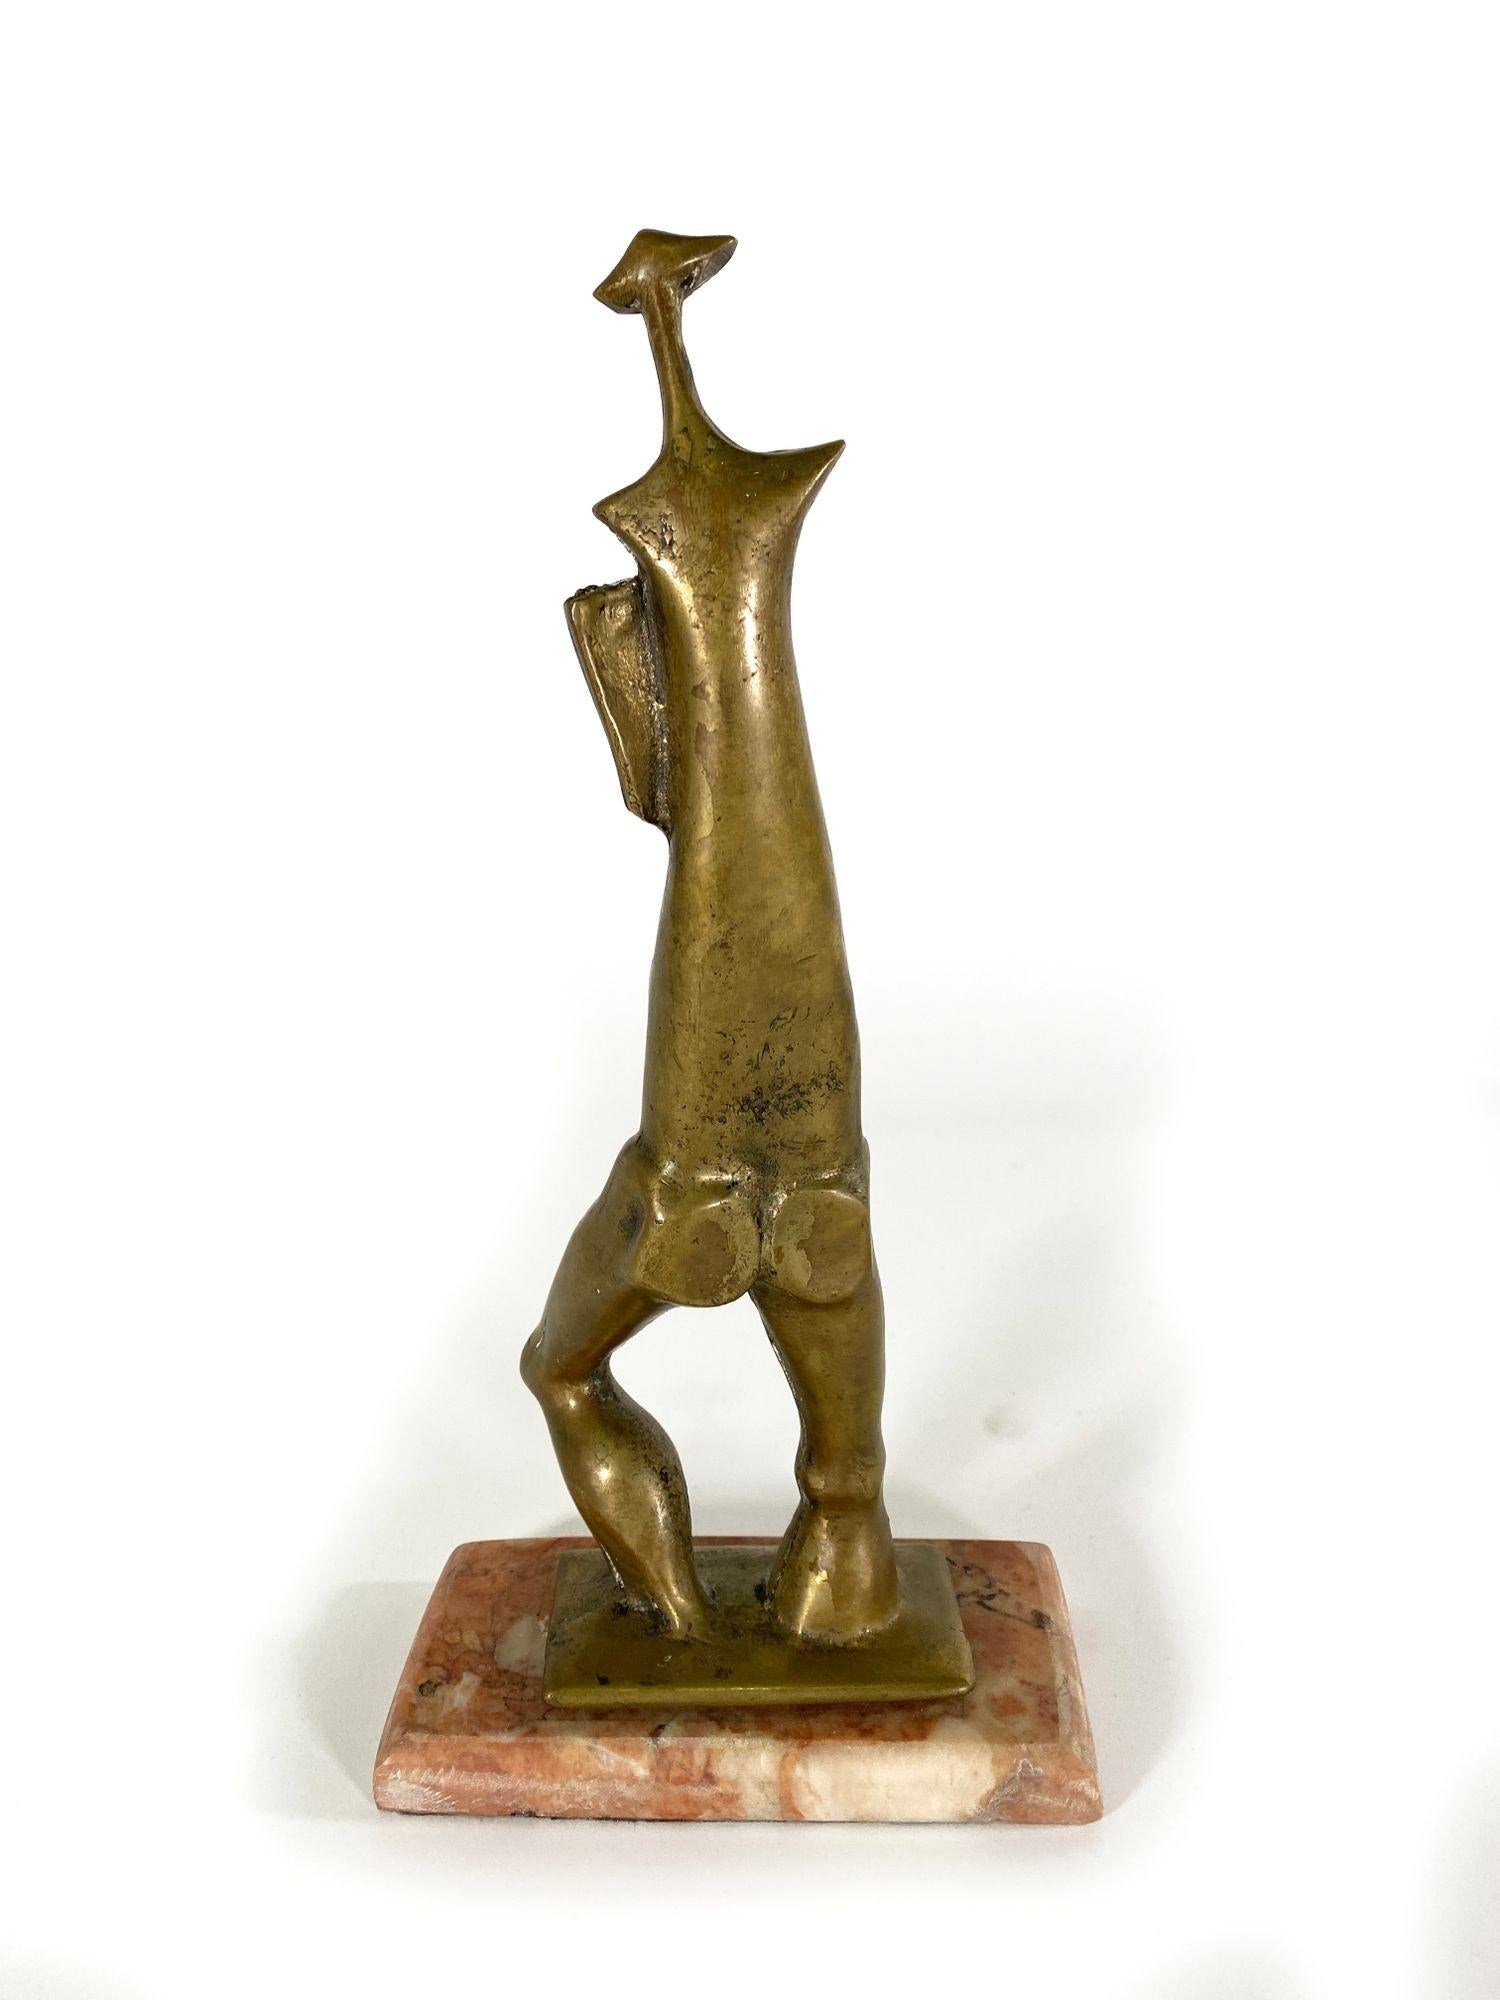 Mid-20th Century Italian Modern Bronze Abstract Sculpture on Marble Base, 1950s For Sale